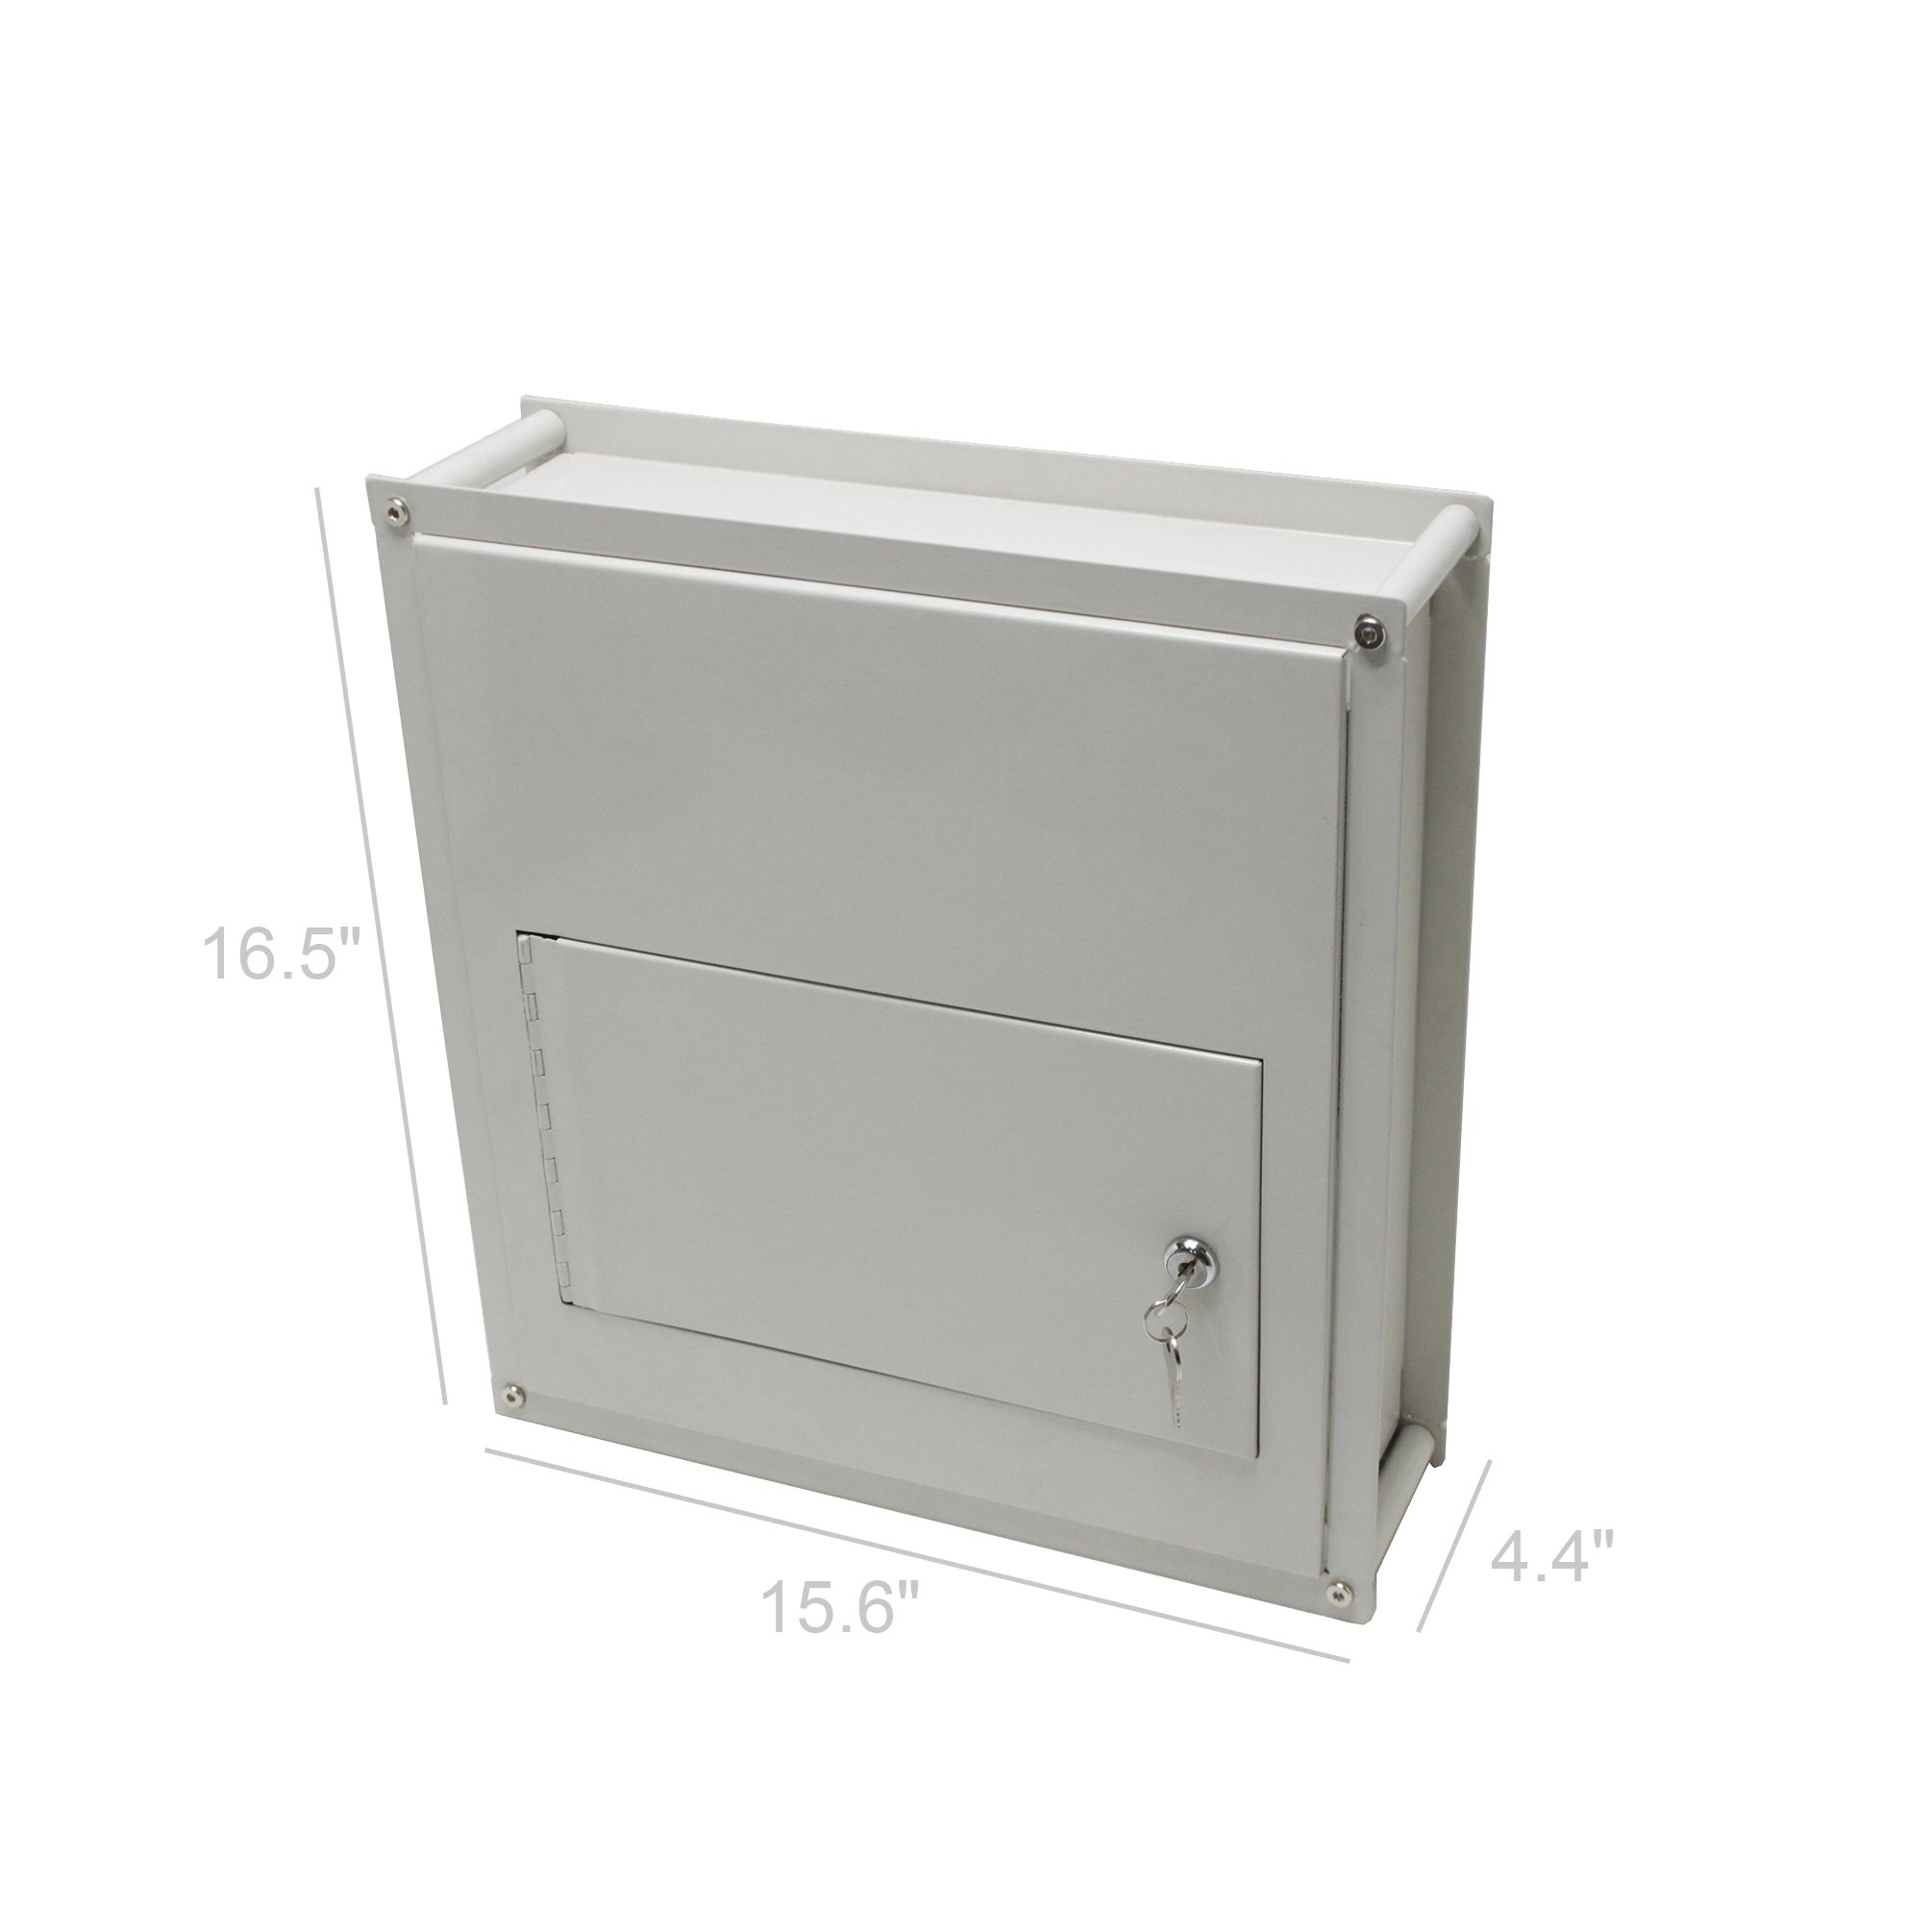 FixtureDisplays Adjustable Thickness Through-The-Wall Letter/Payment Locking Drop Box for 4" - 8" Wall 15958